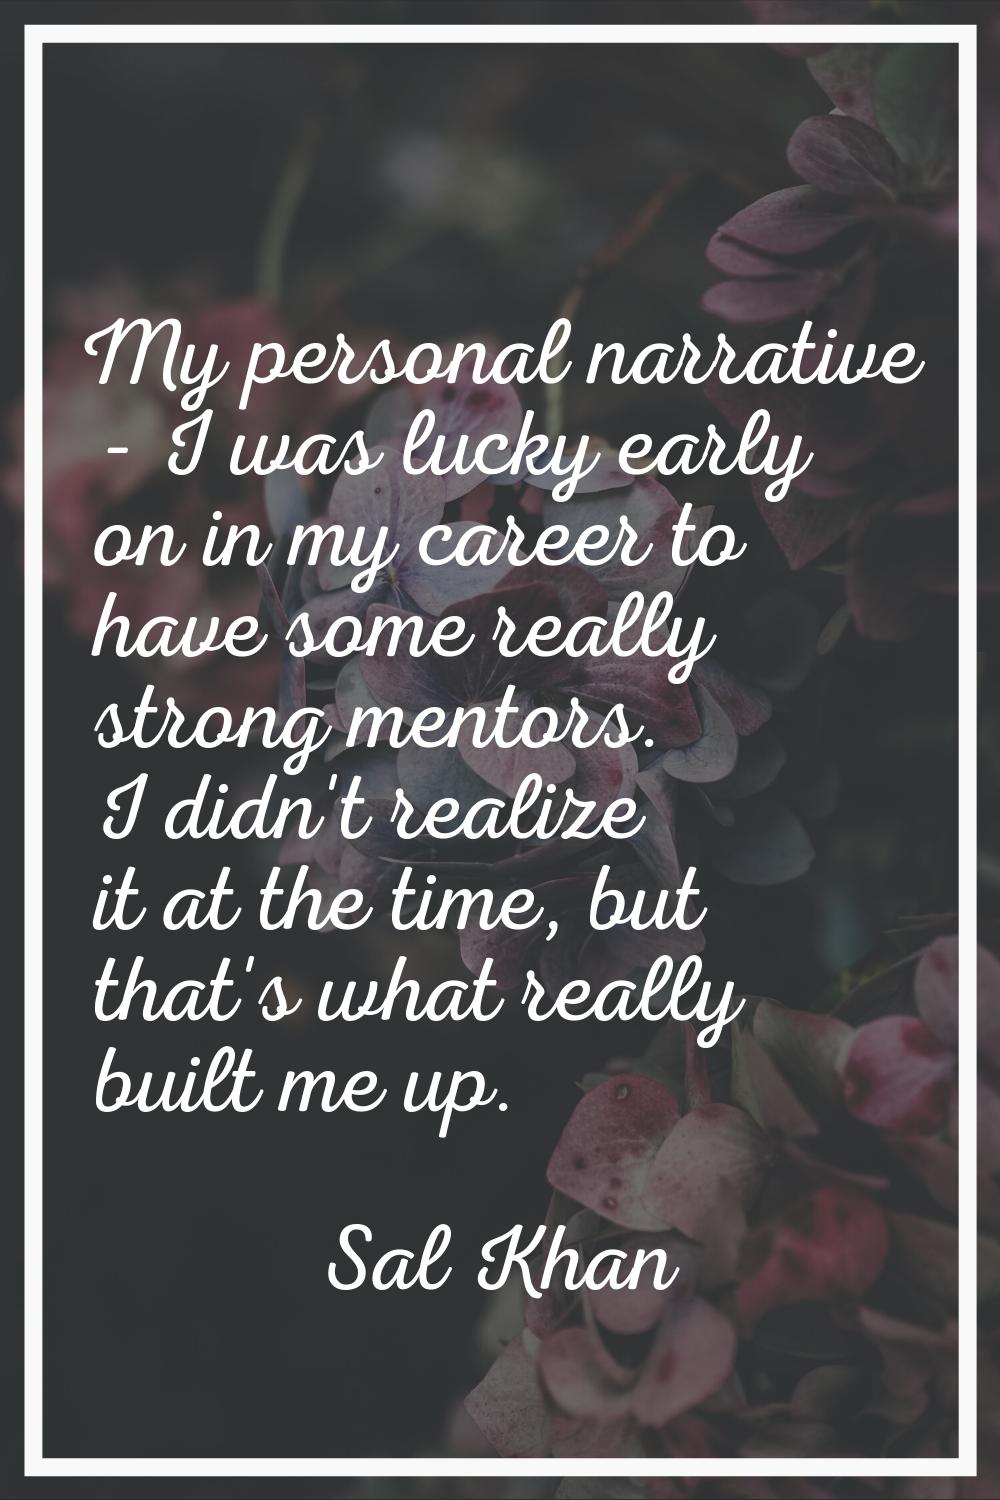 My personal narrative - I was lucky early on in my career to have some really strong mentors. I did